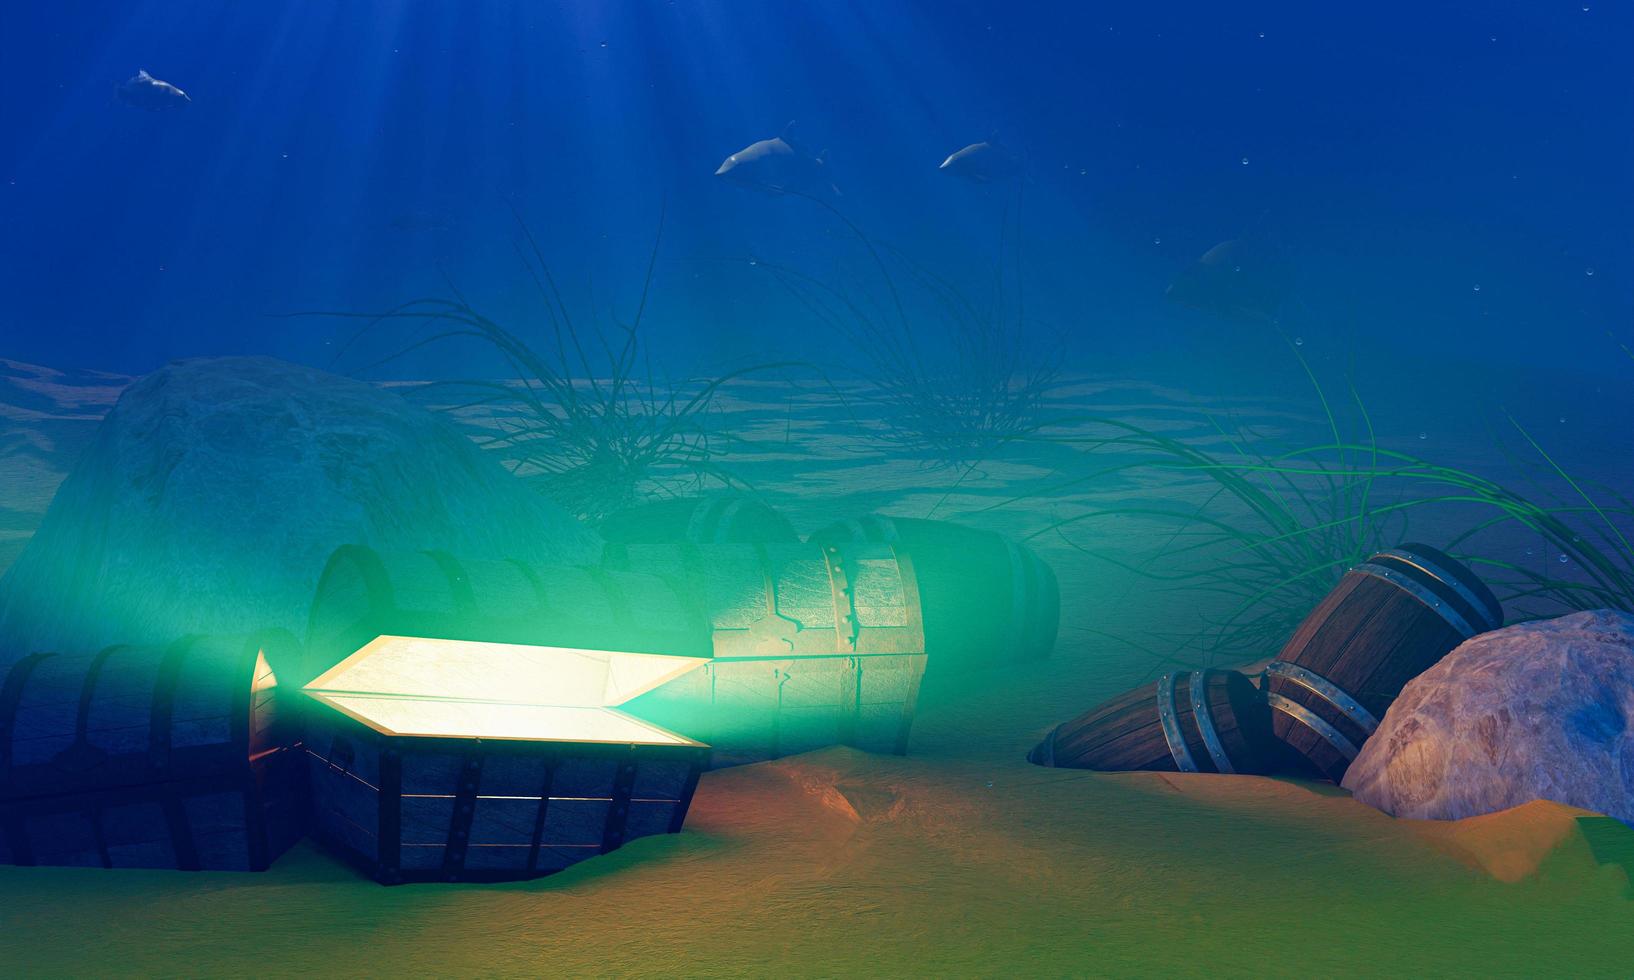 The old treasure chest sunk under the sea. The light shone out of the treasure chest. Under the sea atmosphere, there are rocks, sand, and treasure chest buried. 3D Rendering photo